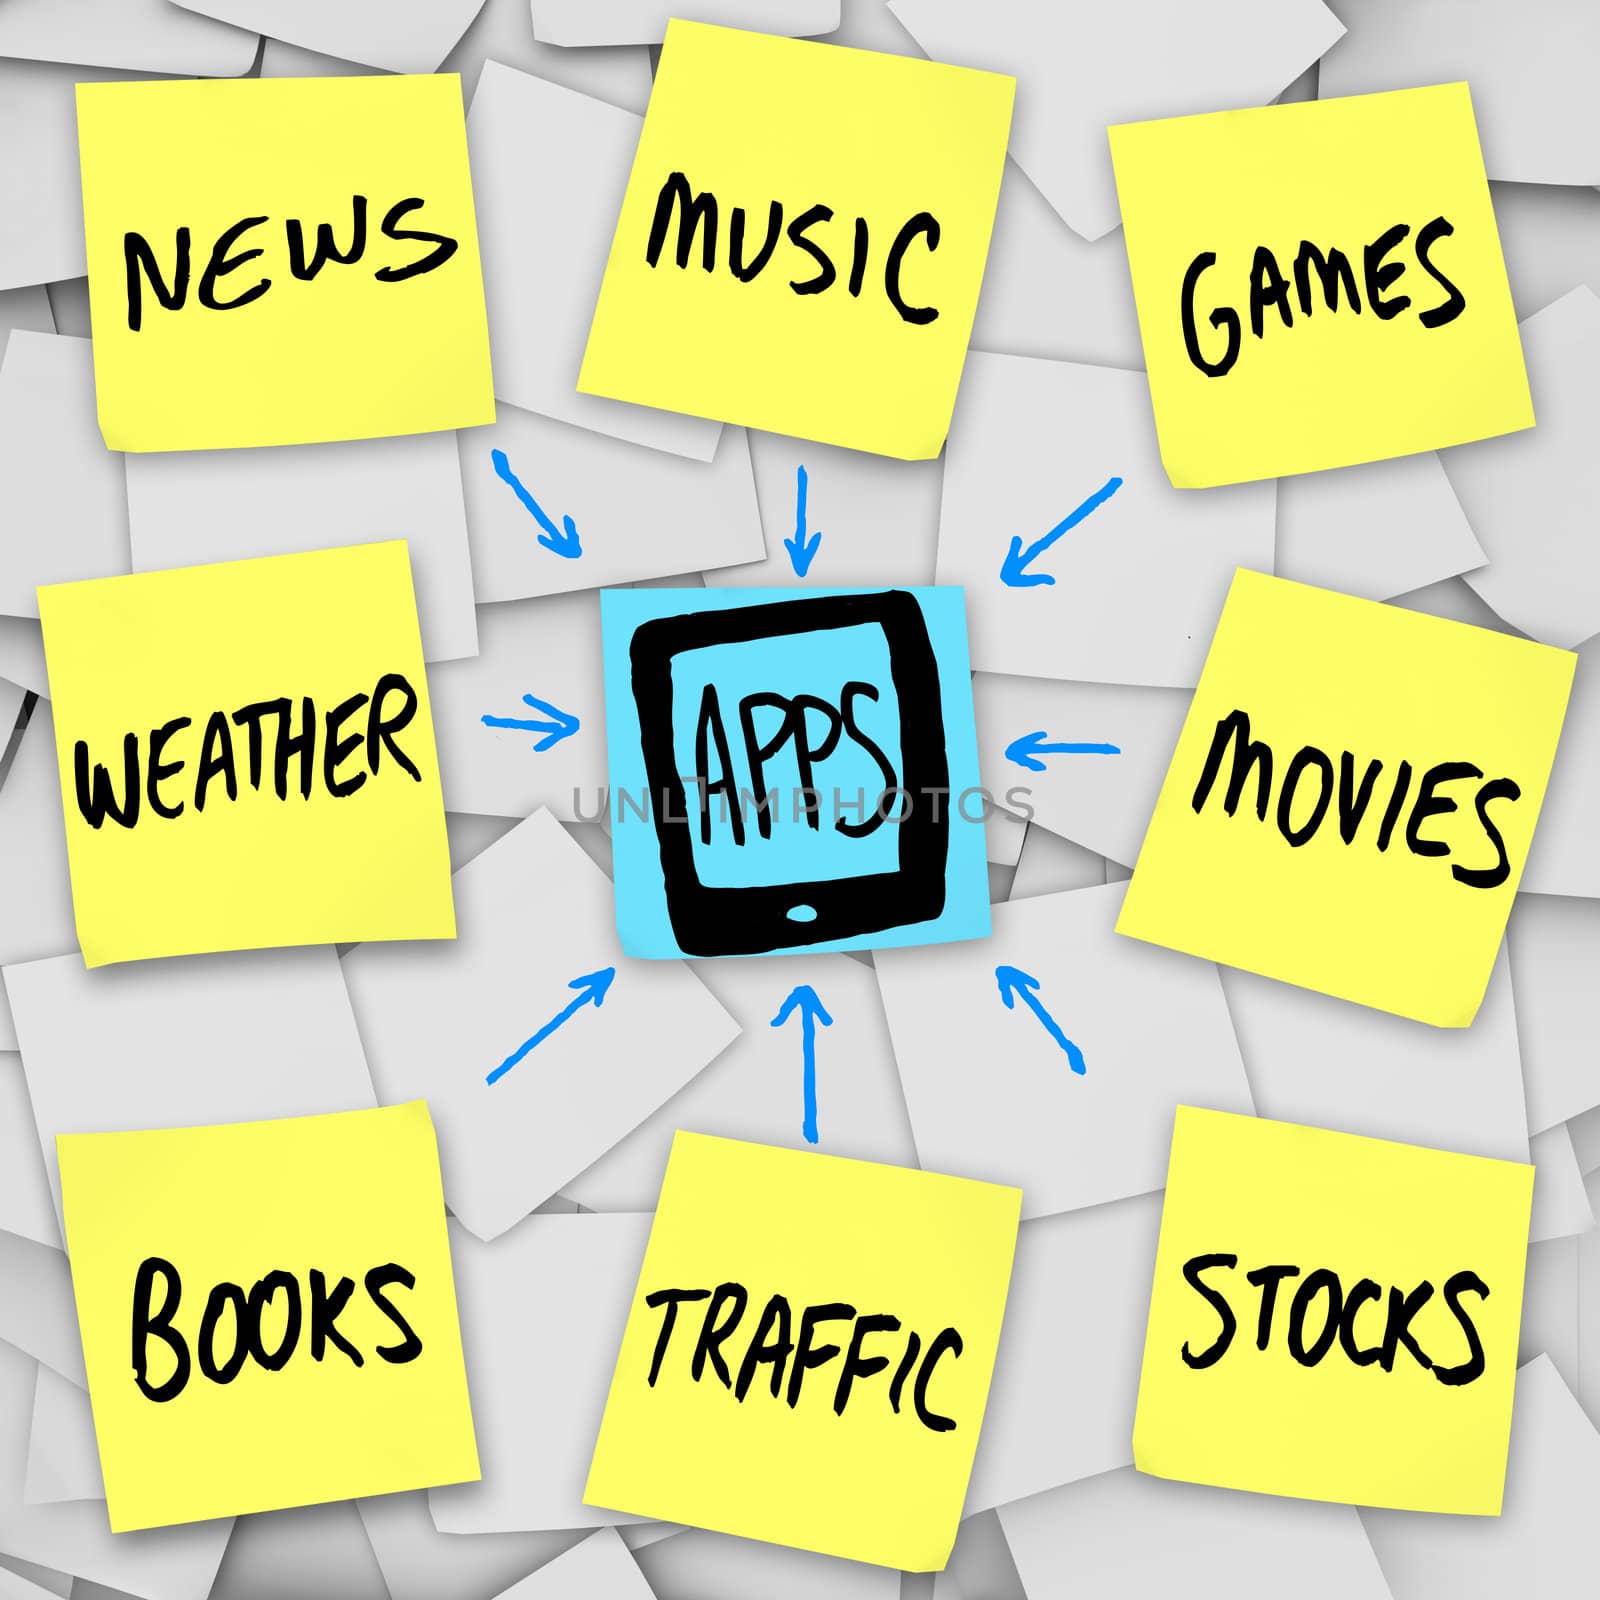 Several categories of apps written on sticky notes with arrows symbolizing the downloading of application programs into devices such as smart mobile phones and computers